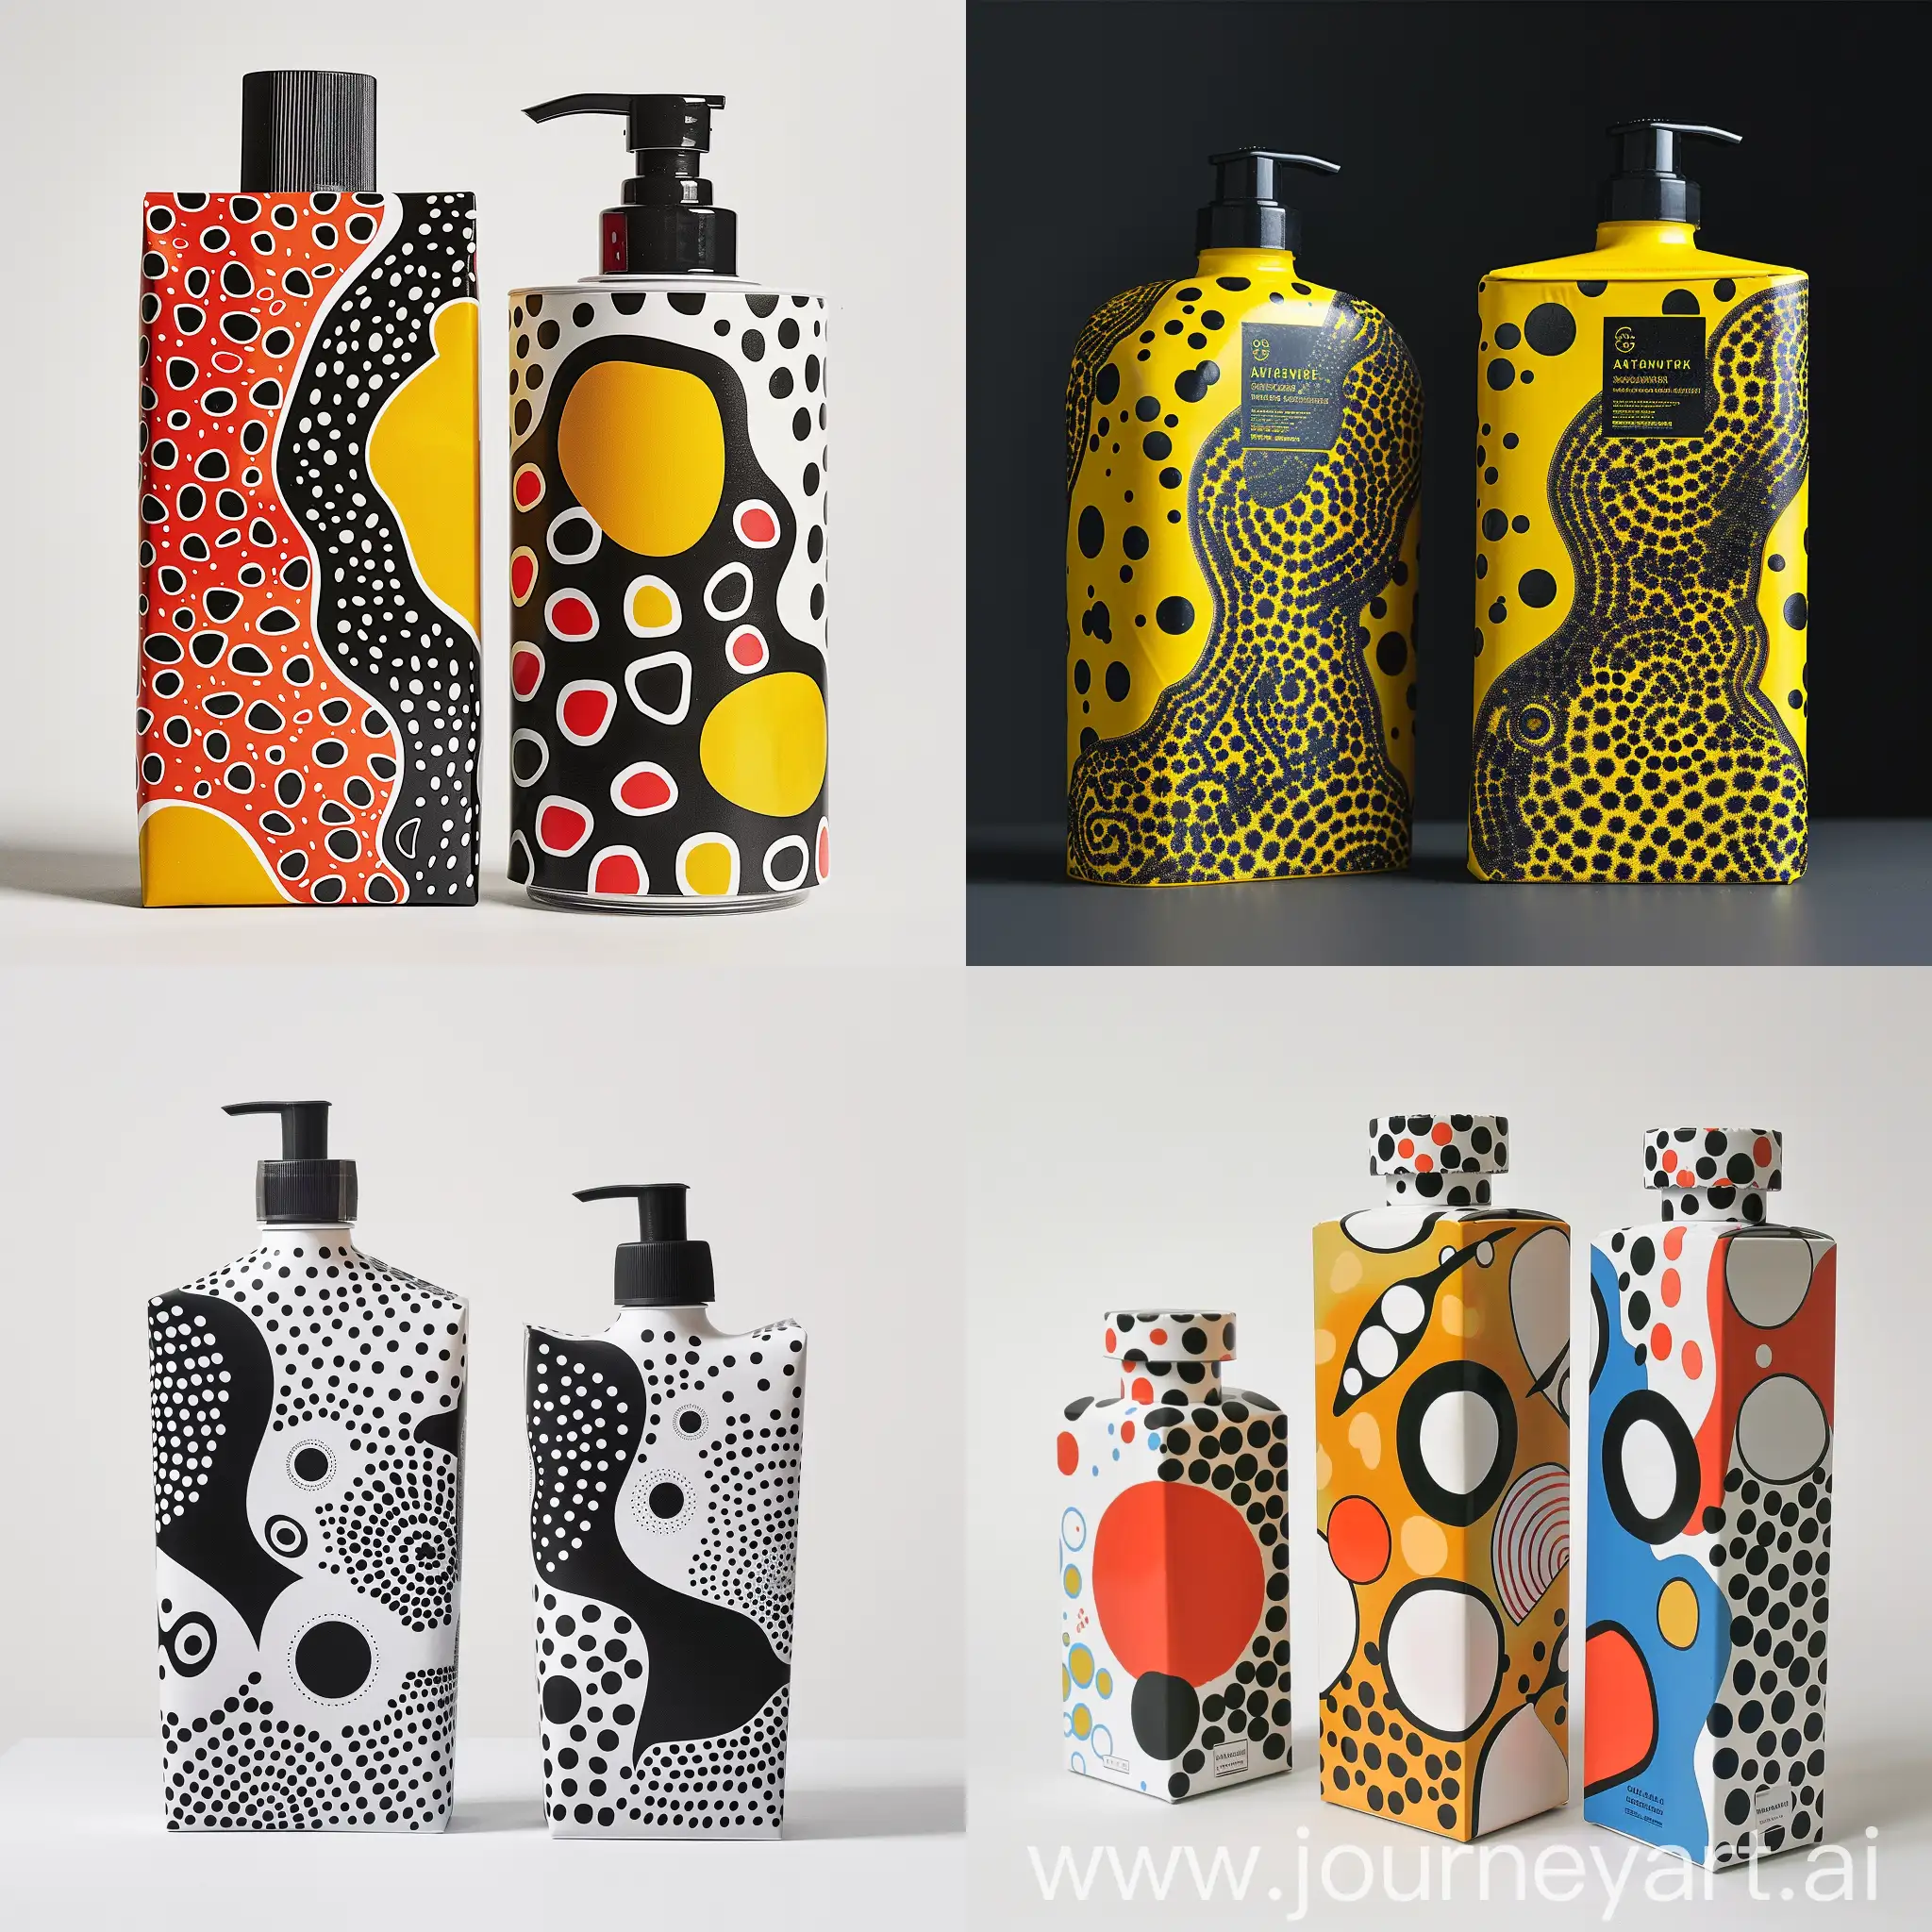 Premium-Class-Gel-Shower-and-Shampoo-Packaging-with-Modern-Graphic-Style-by-Yayoi-Kusama